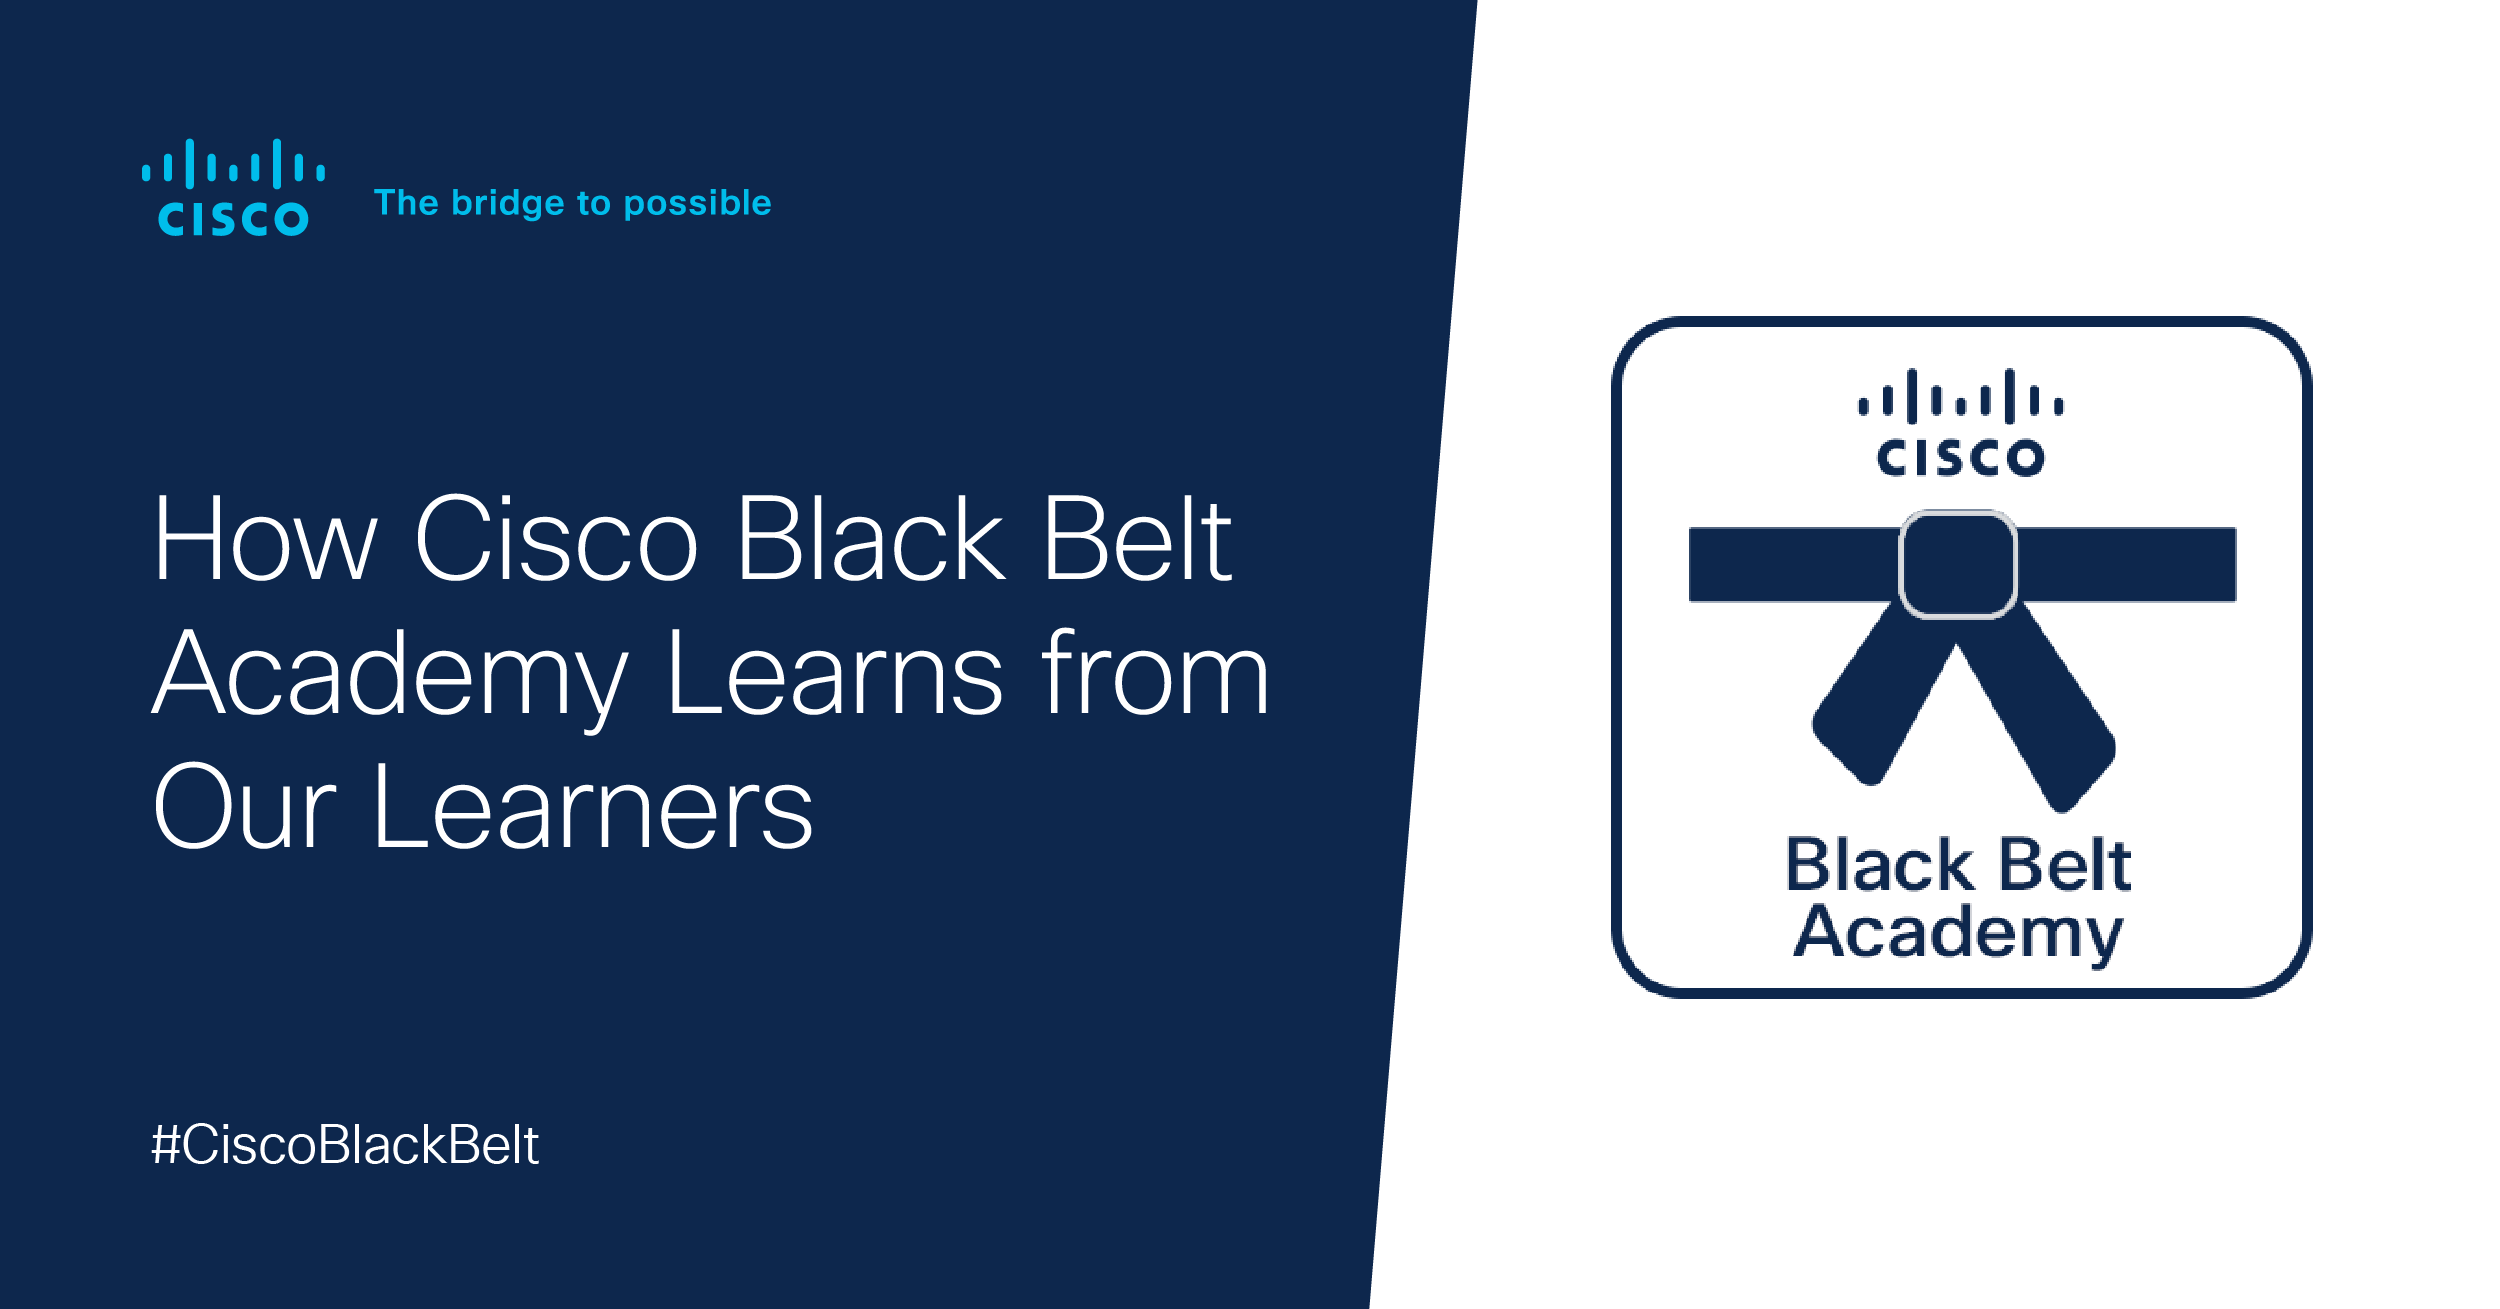 How Cisco Black Belt Academy Learns from Our Learners